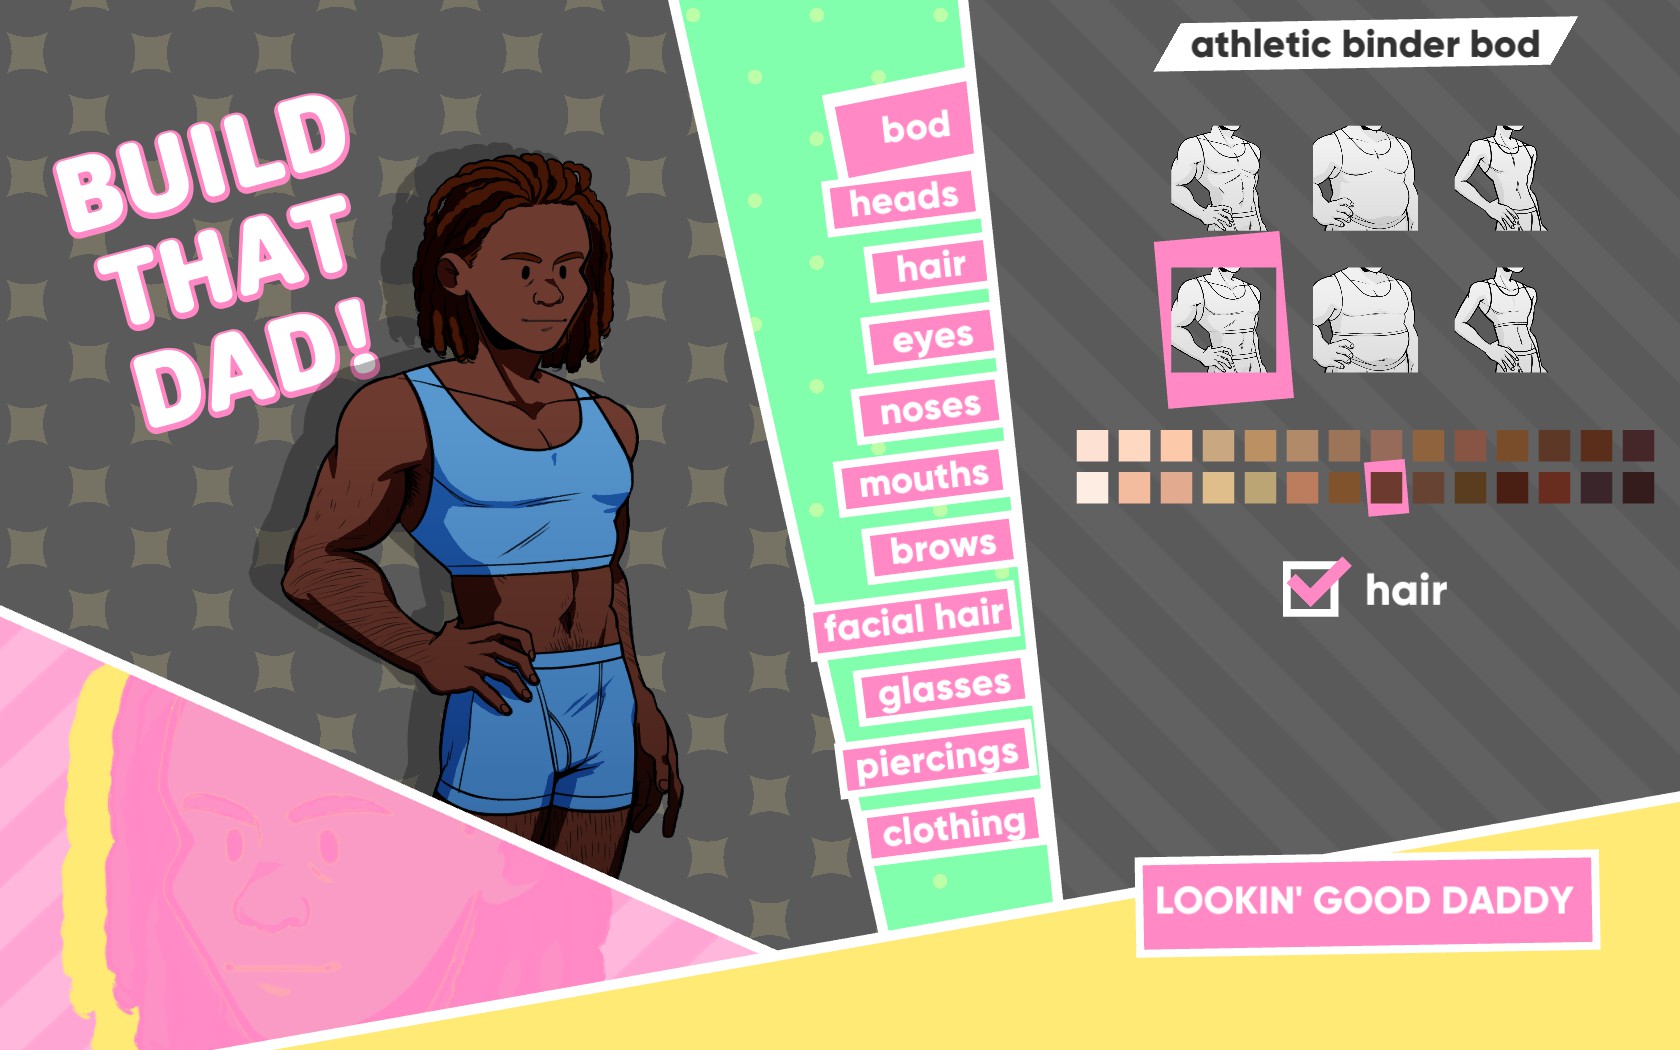 A masculine figure on a character creator, which says, 'Build that dad!' Options are: bod, heads, hair, eyes, noses, mouths, brows, facial hair, glasses, piercings, and clothing. 'Bod' is selected, with six image options, many colour options, a checkbox for 'hair', and the label 'athletic binder bod'.